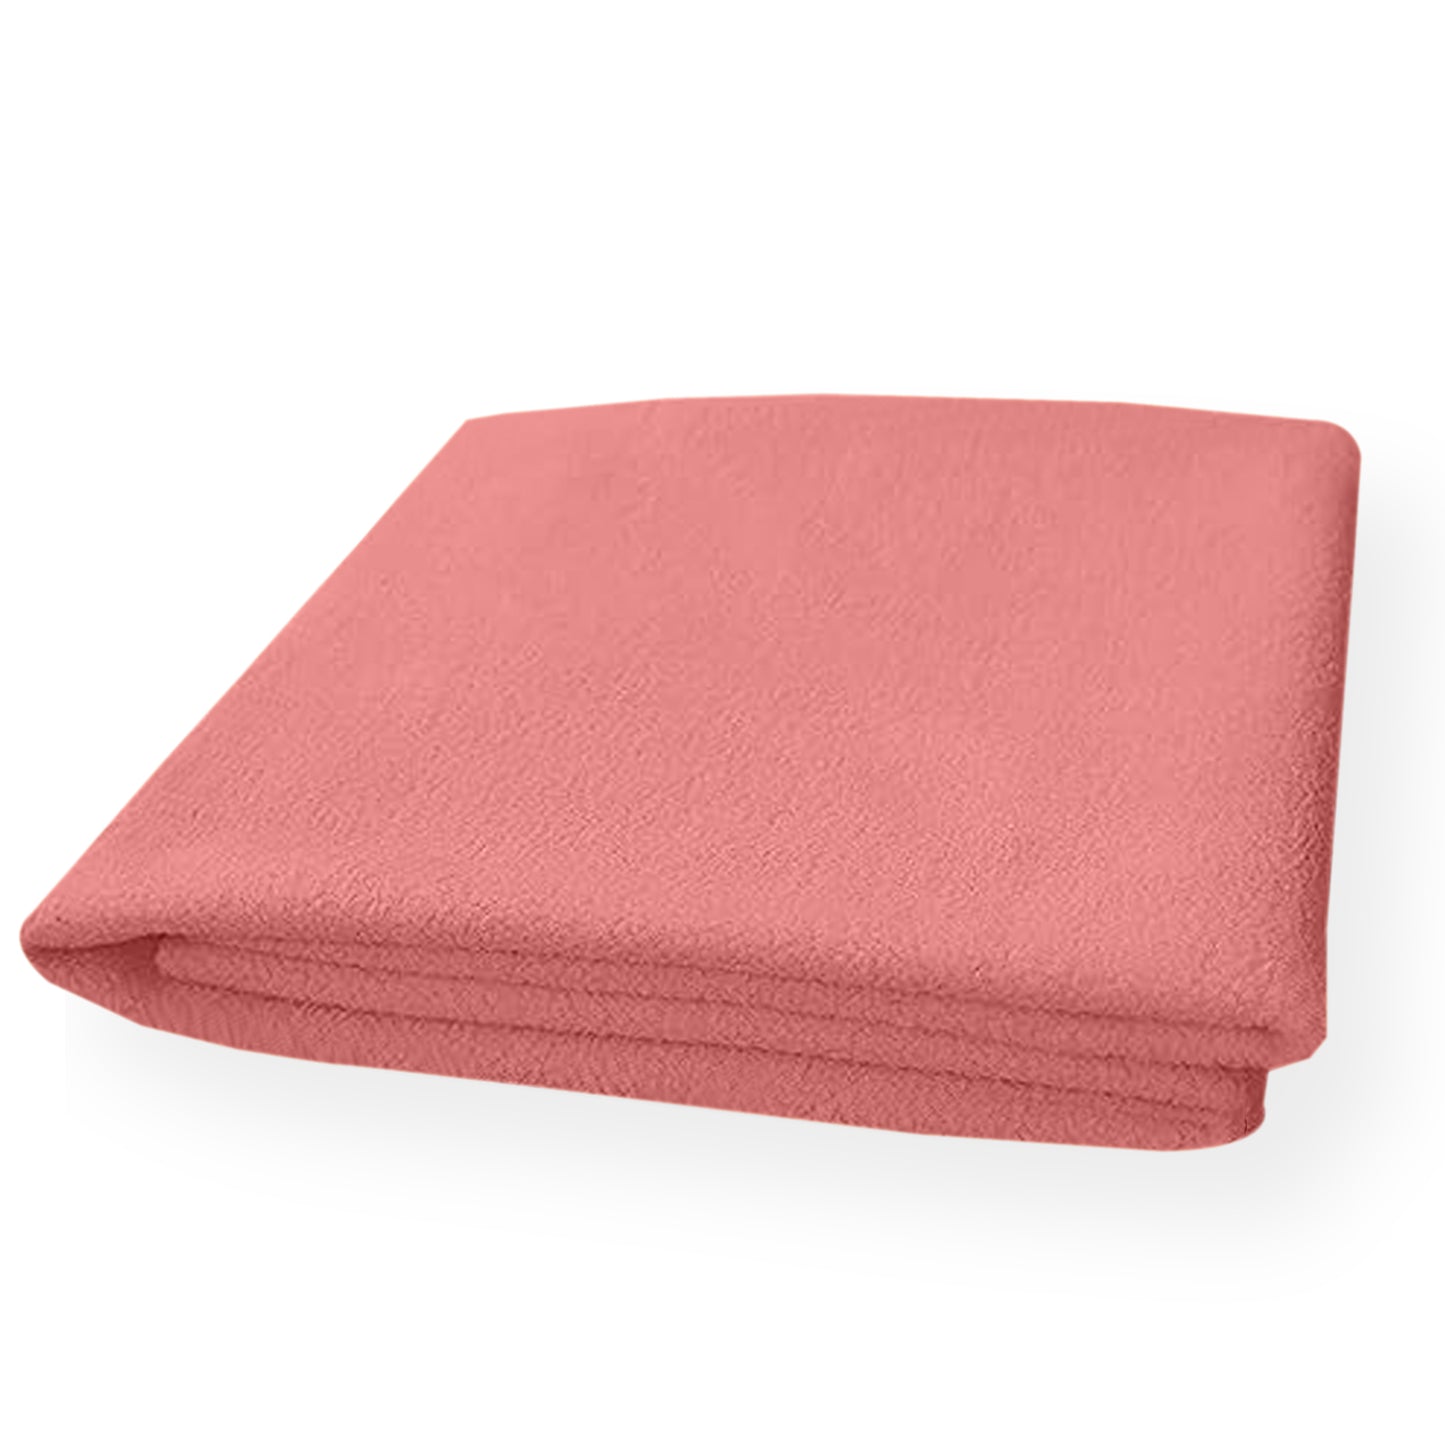 Waterproof Bed Protector, Extra Absorbent Quick Dry Sheet, Baby Bed Protector (70 X 50 CM), Pack of 2 -SELMON ROSE